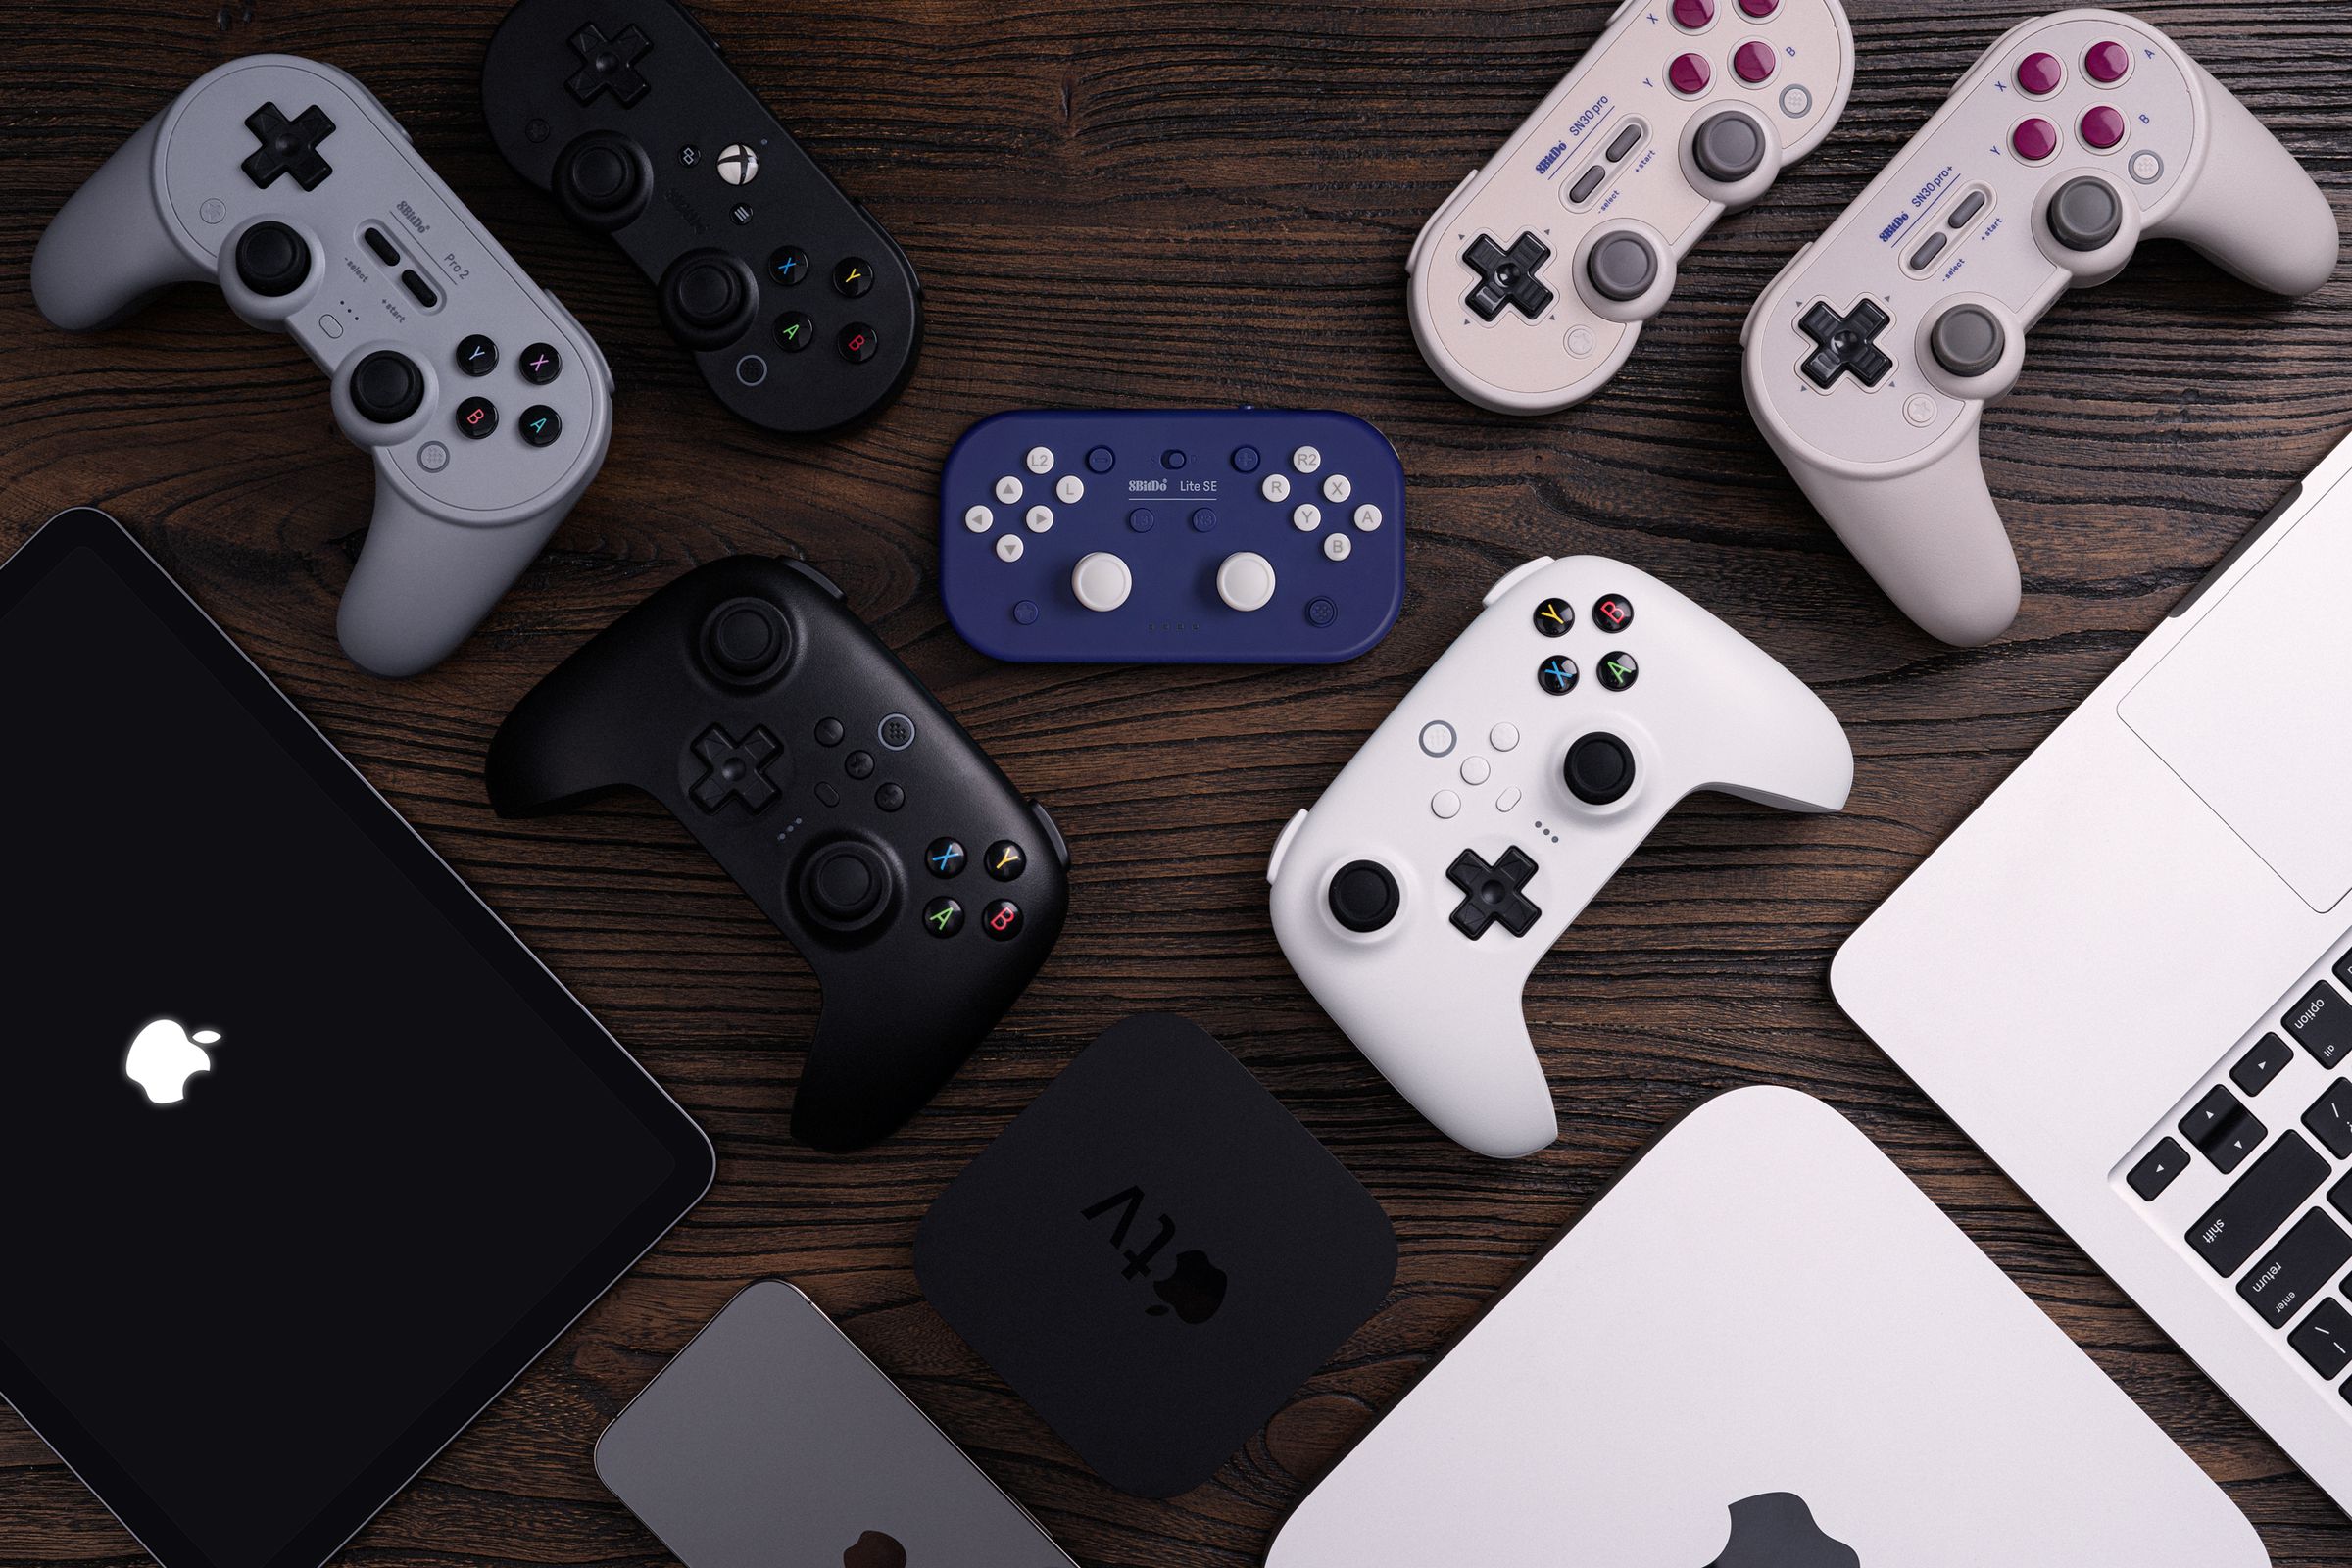 The six controllers with new Apple compatibility offer a little variety in form factor, layout, and look.